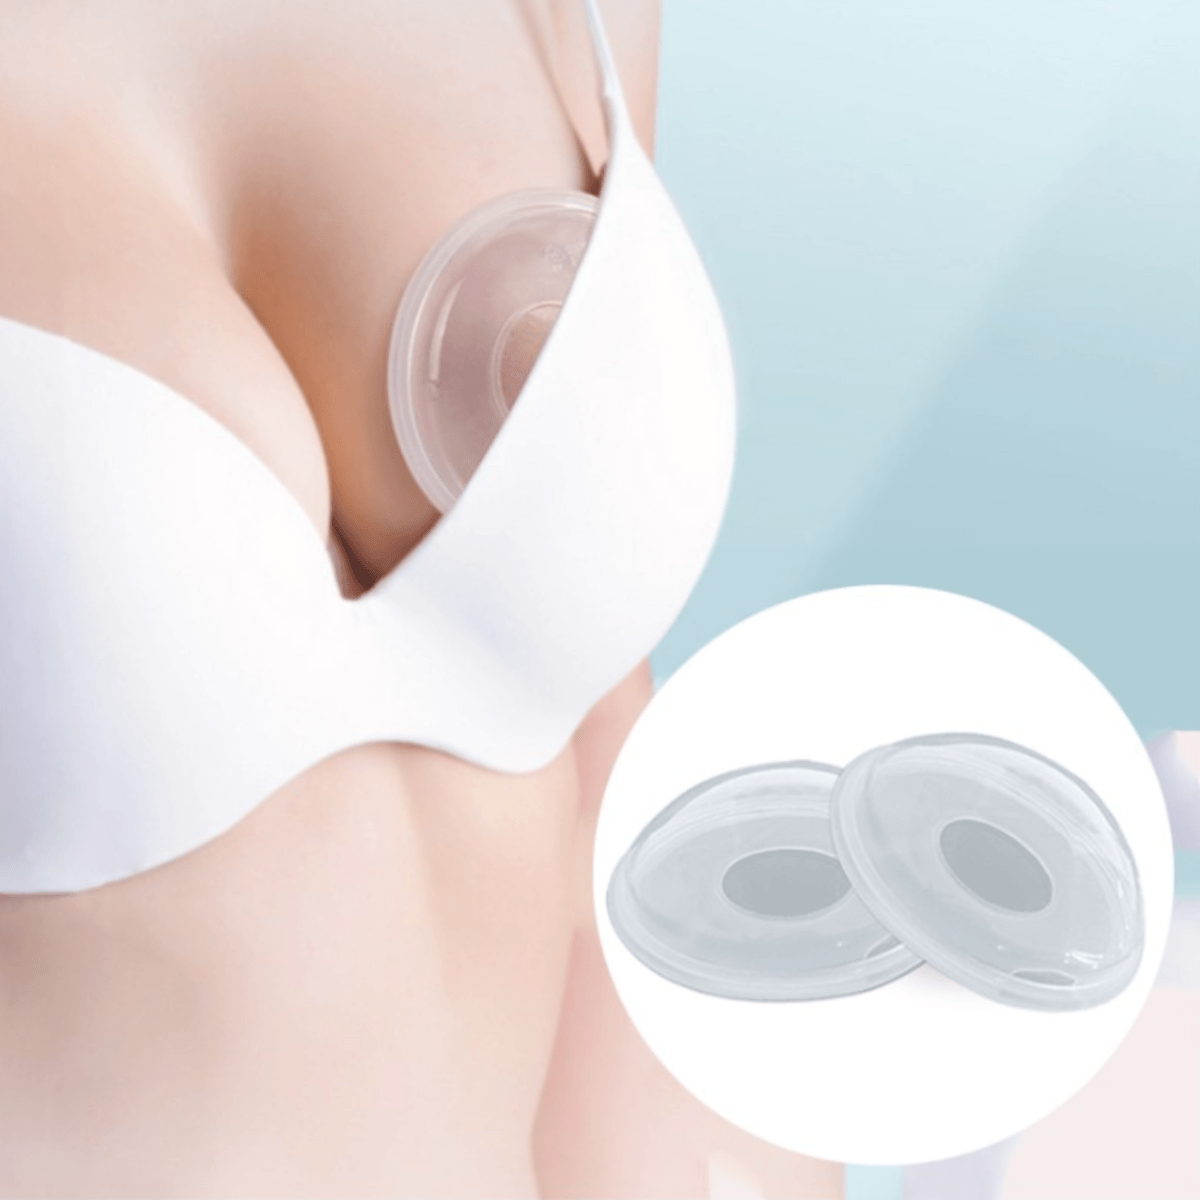 Breast Shells, 2 Pack Nursing Cups, Milk Saver, Protect Sore Nipples For  Breastfeeding, Collect Breastmilk Leaks For Nursing Moms, Soft And Flexible  Silicone Material, Reusable 